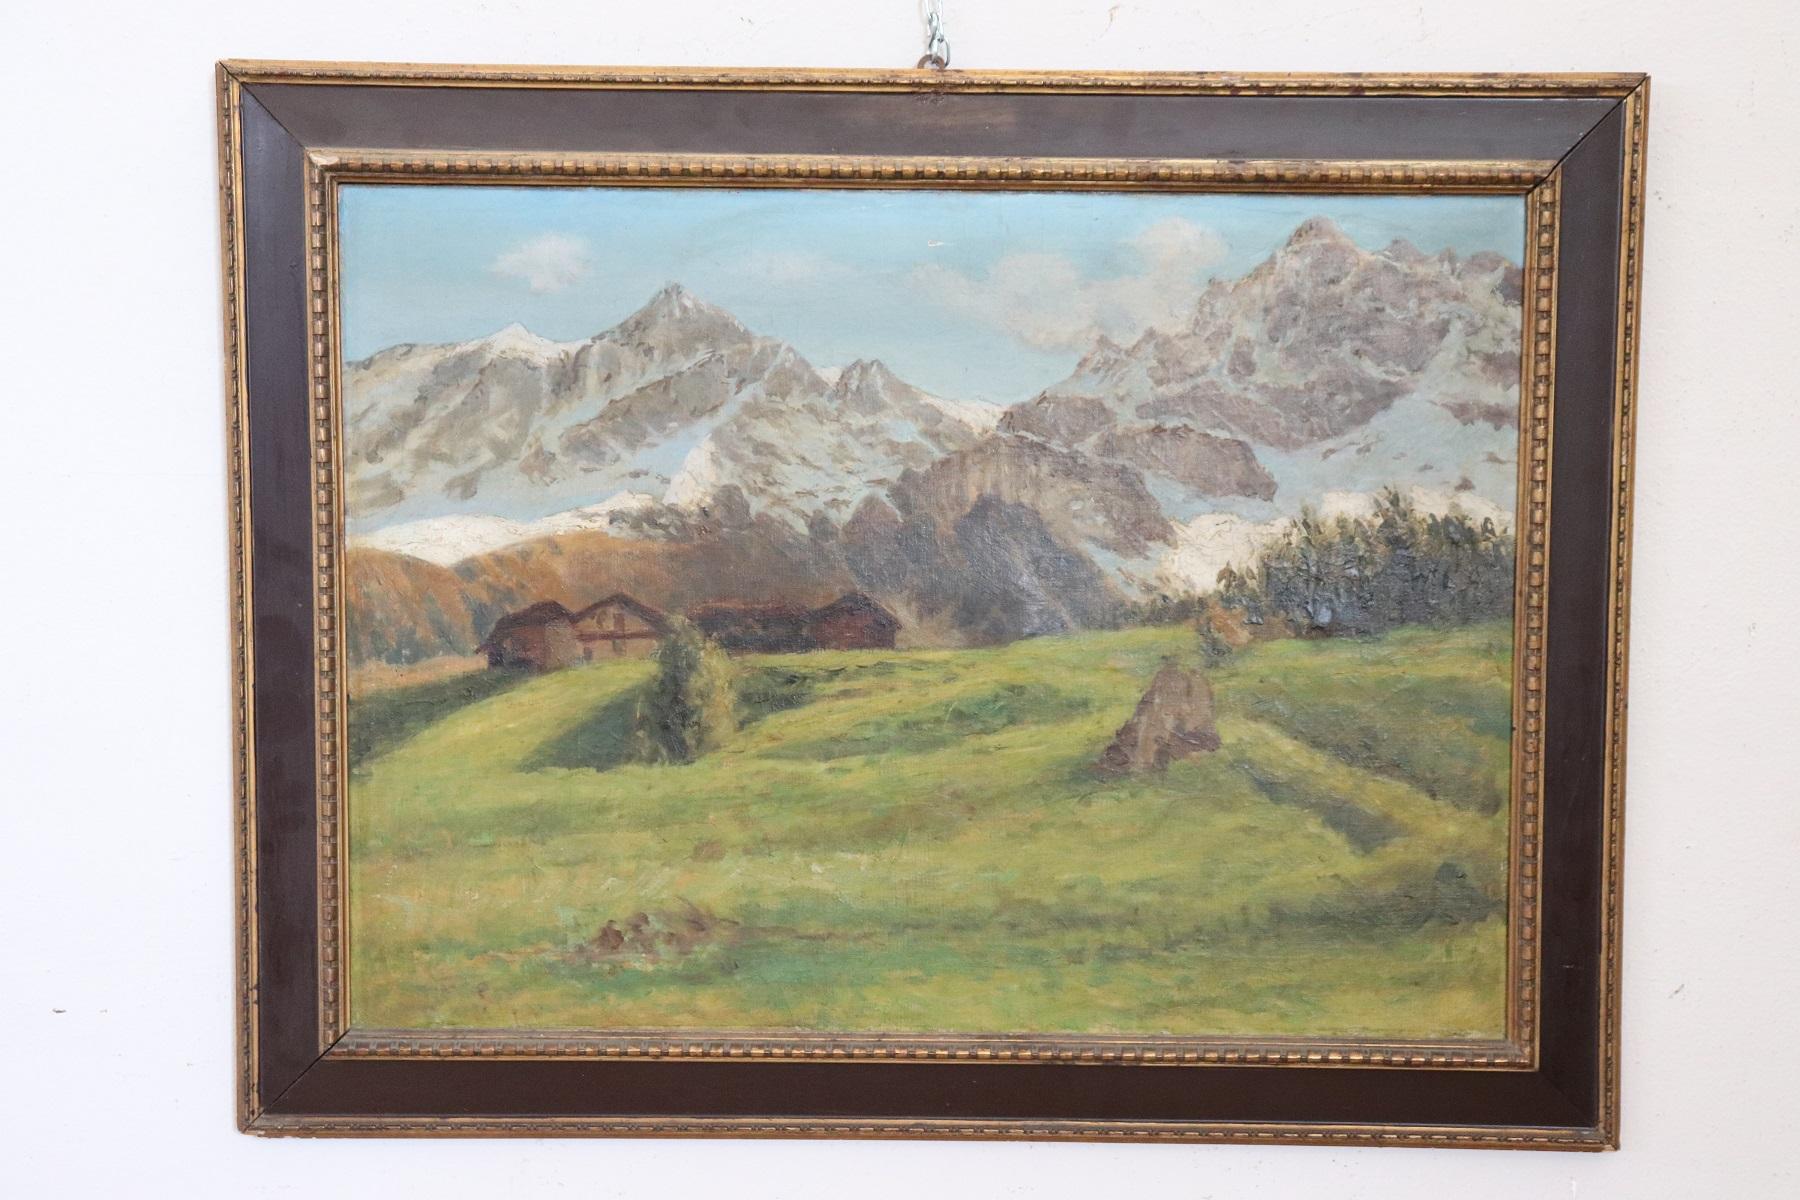 Beautiful oil painting on canvas 1930s. A splendid italian mountain landscape. Not recognized artist. Perfect for collectors who love mountain landscapes. Excellent pictorial quality. Sold with wooden frame.